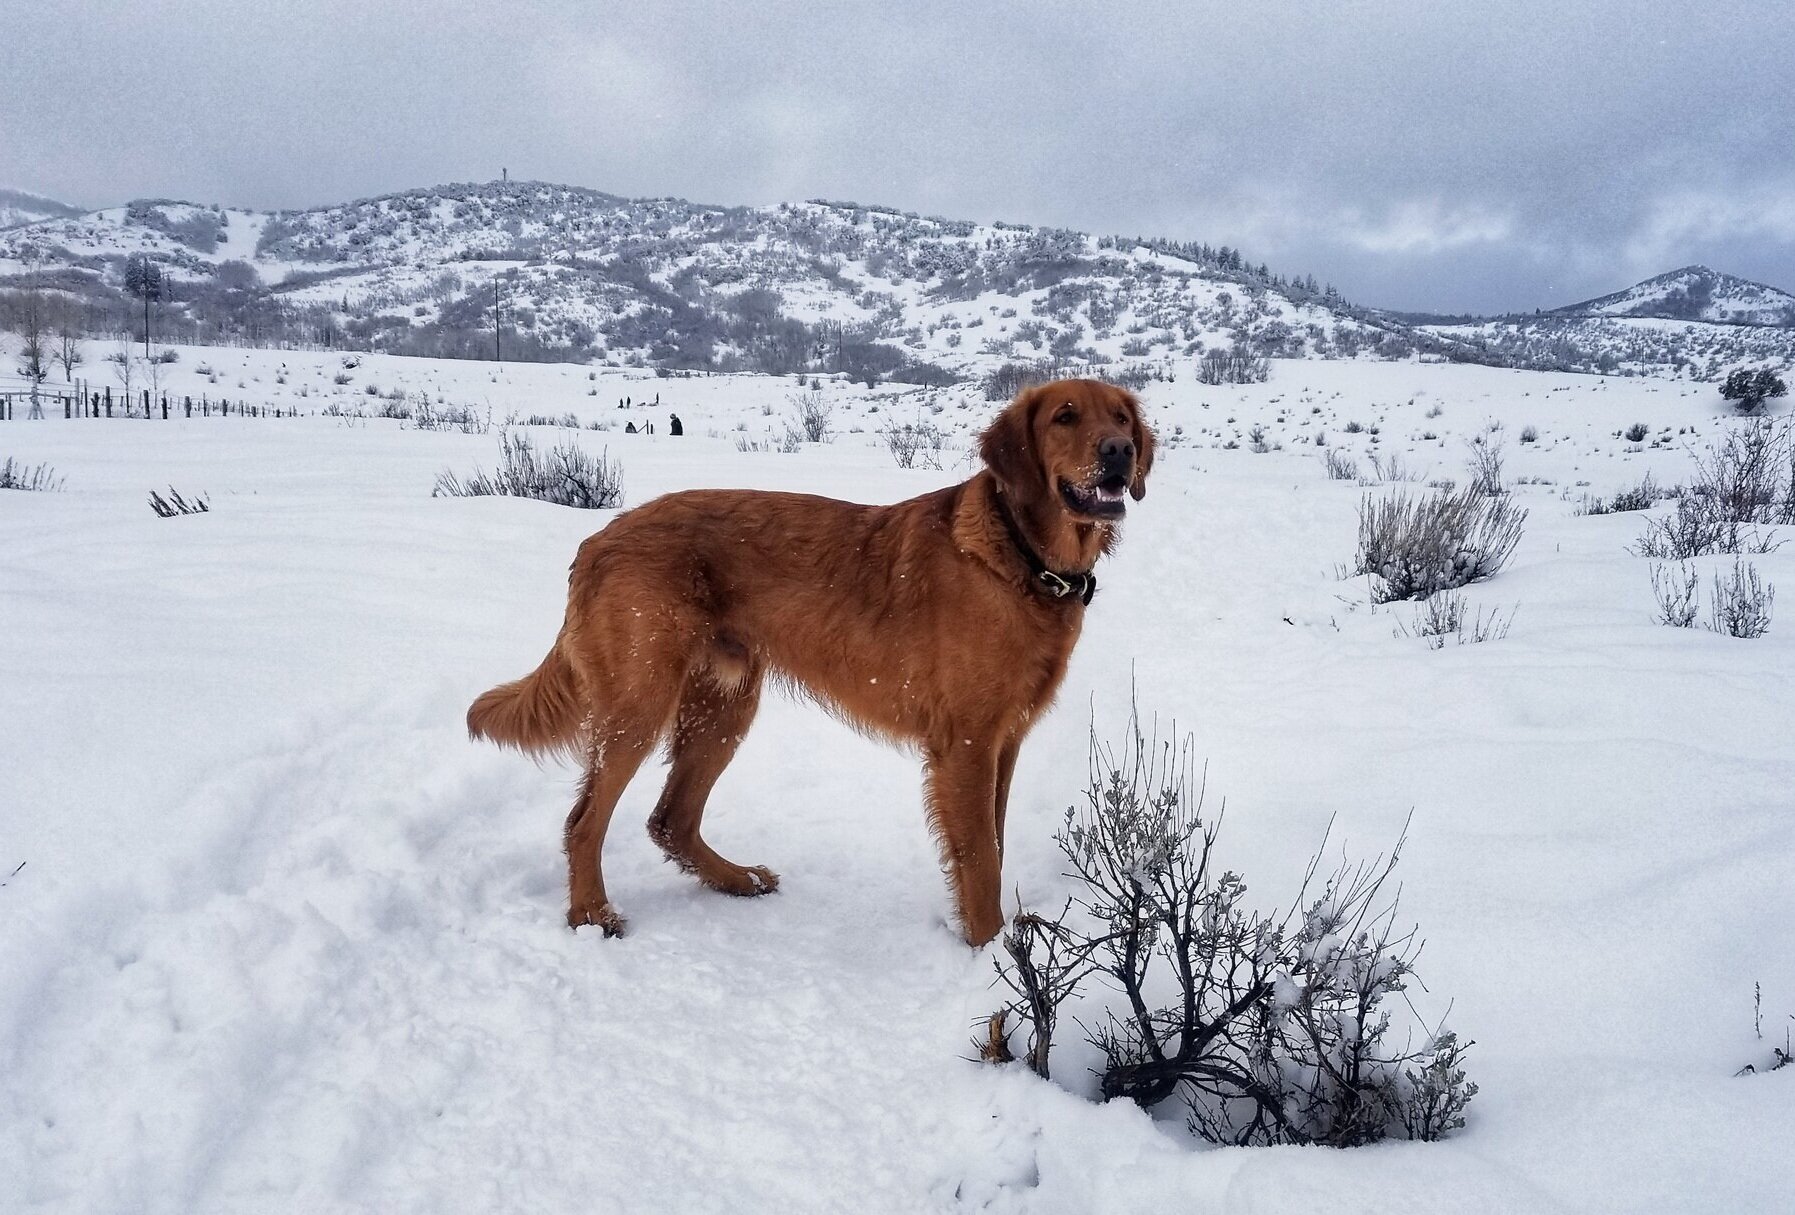 Golden retriever Scout stands in snow in the mountains